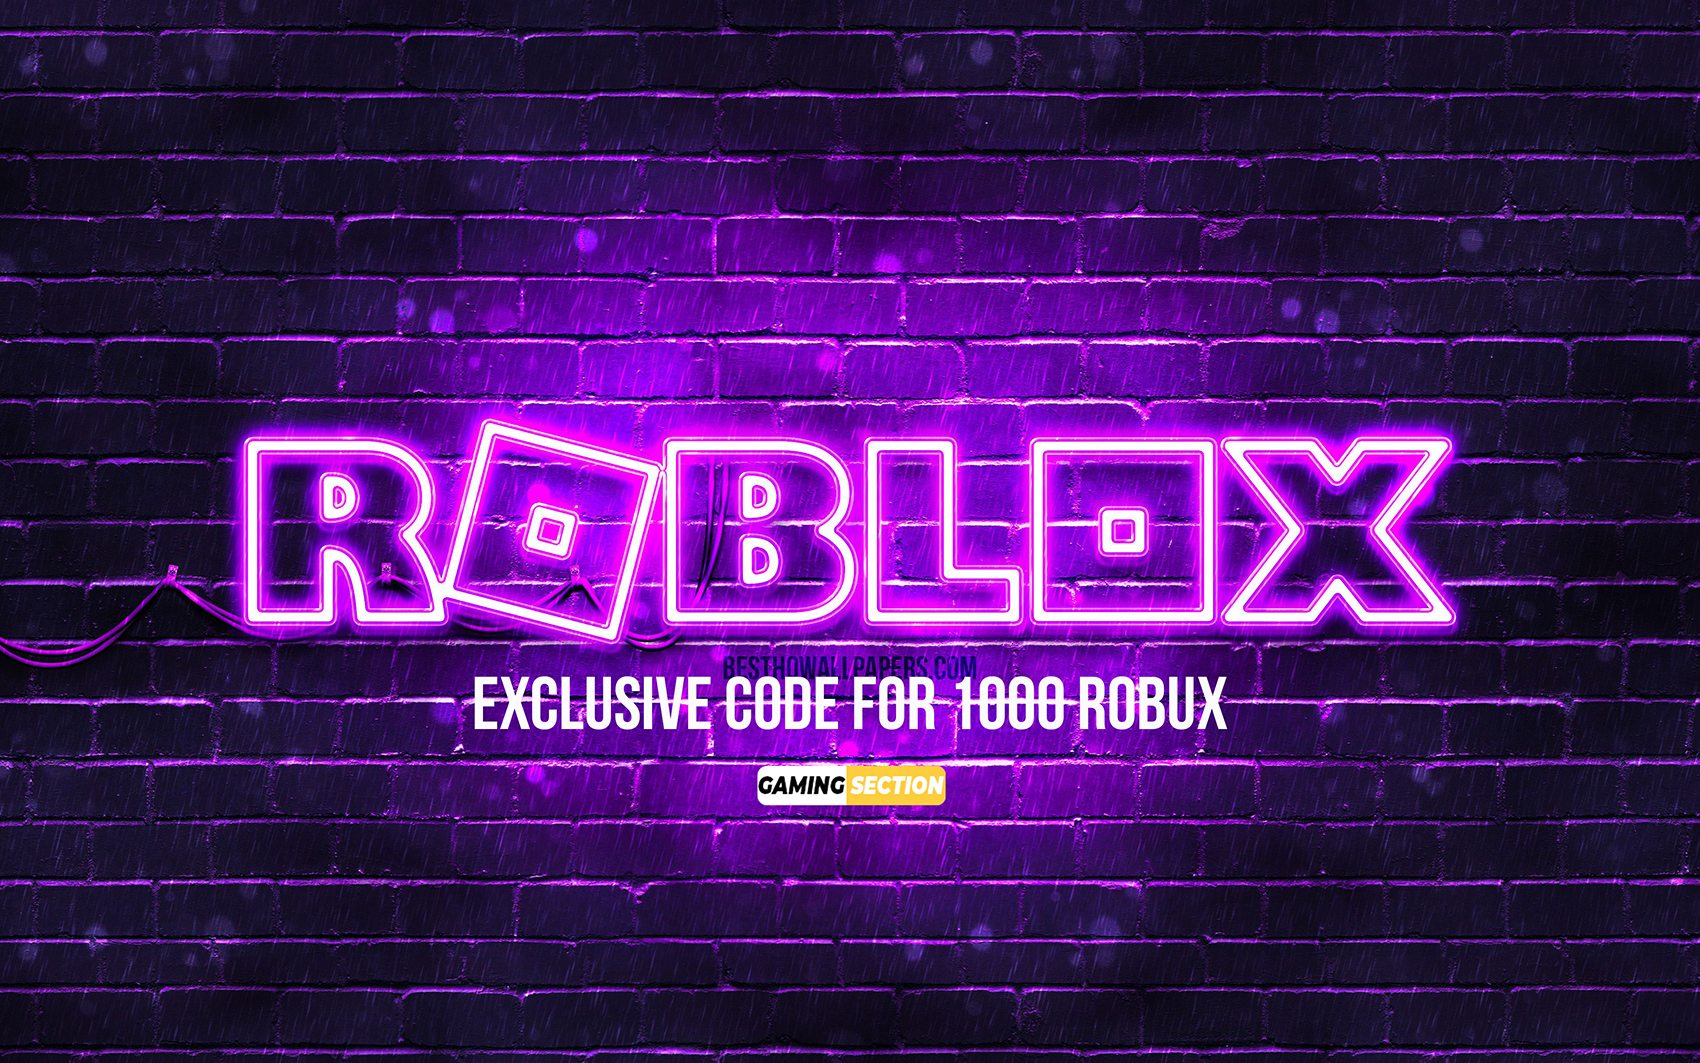 what-s-the-code-for-1000-robux-gaming-section-magazine-gaming-e